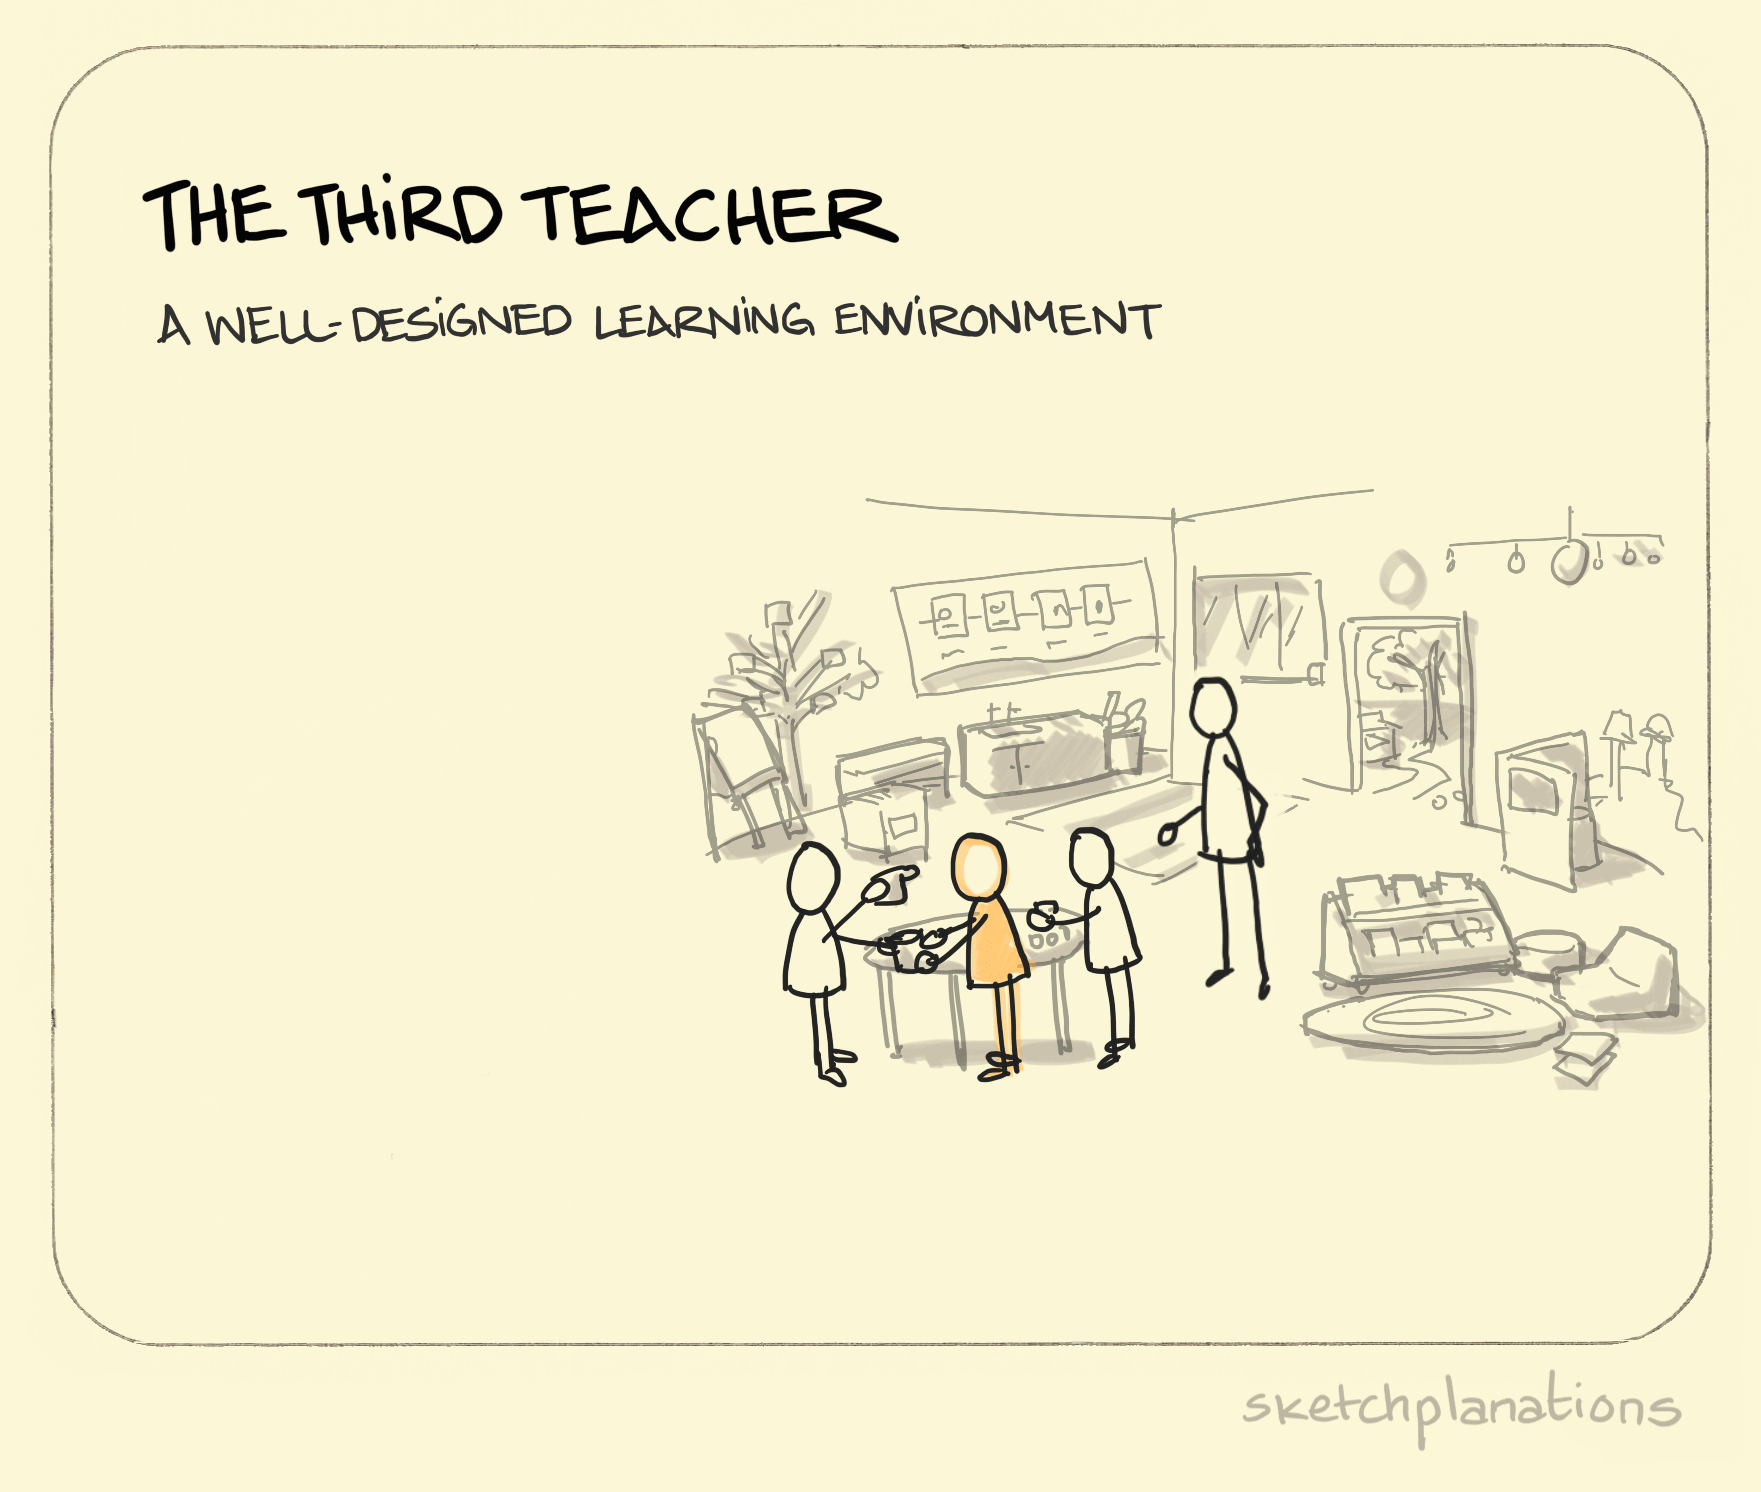 The third teacher: a pupil with 1. a teacher or parent, 2. their peers, and 3. a classroom full of opportunity and aids to learn